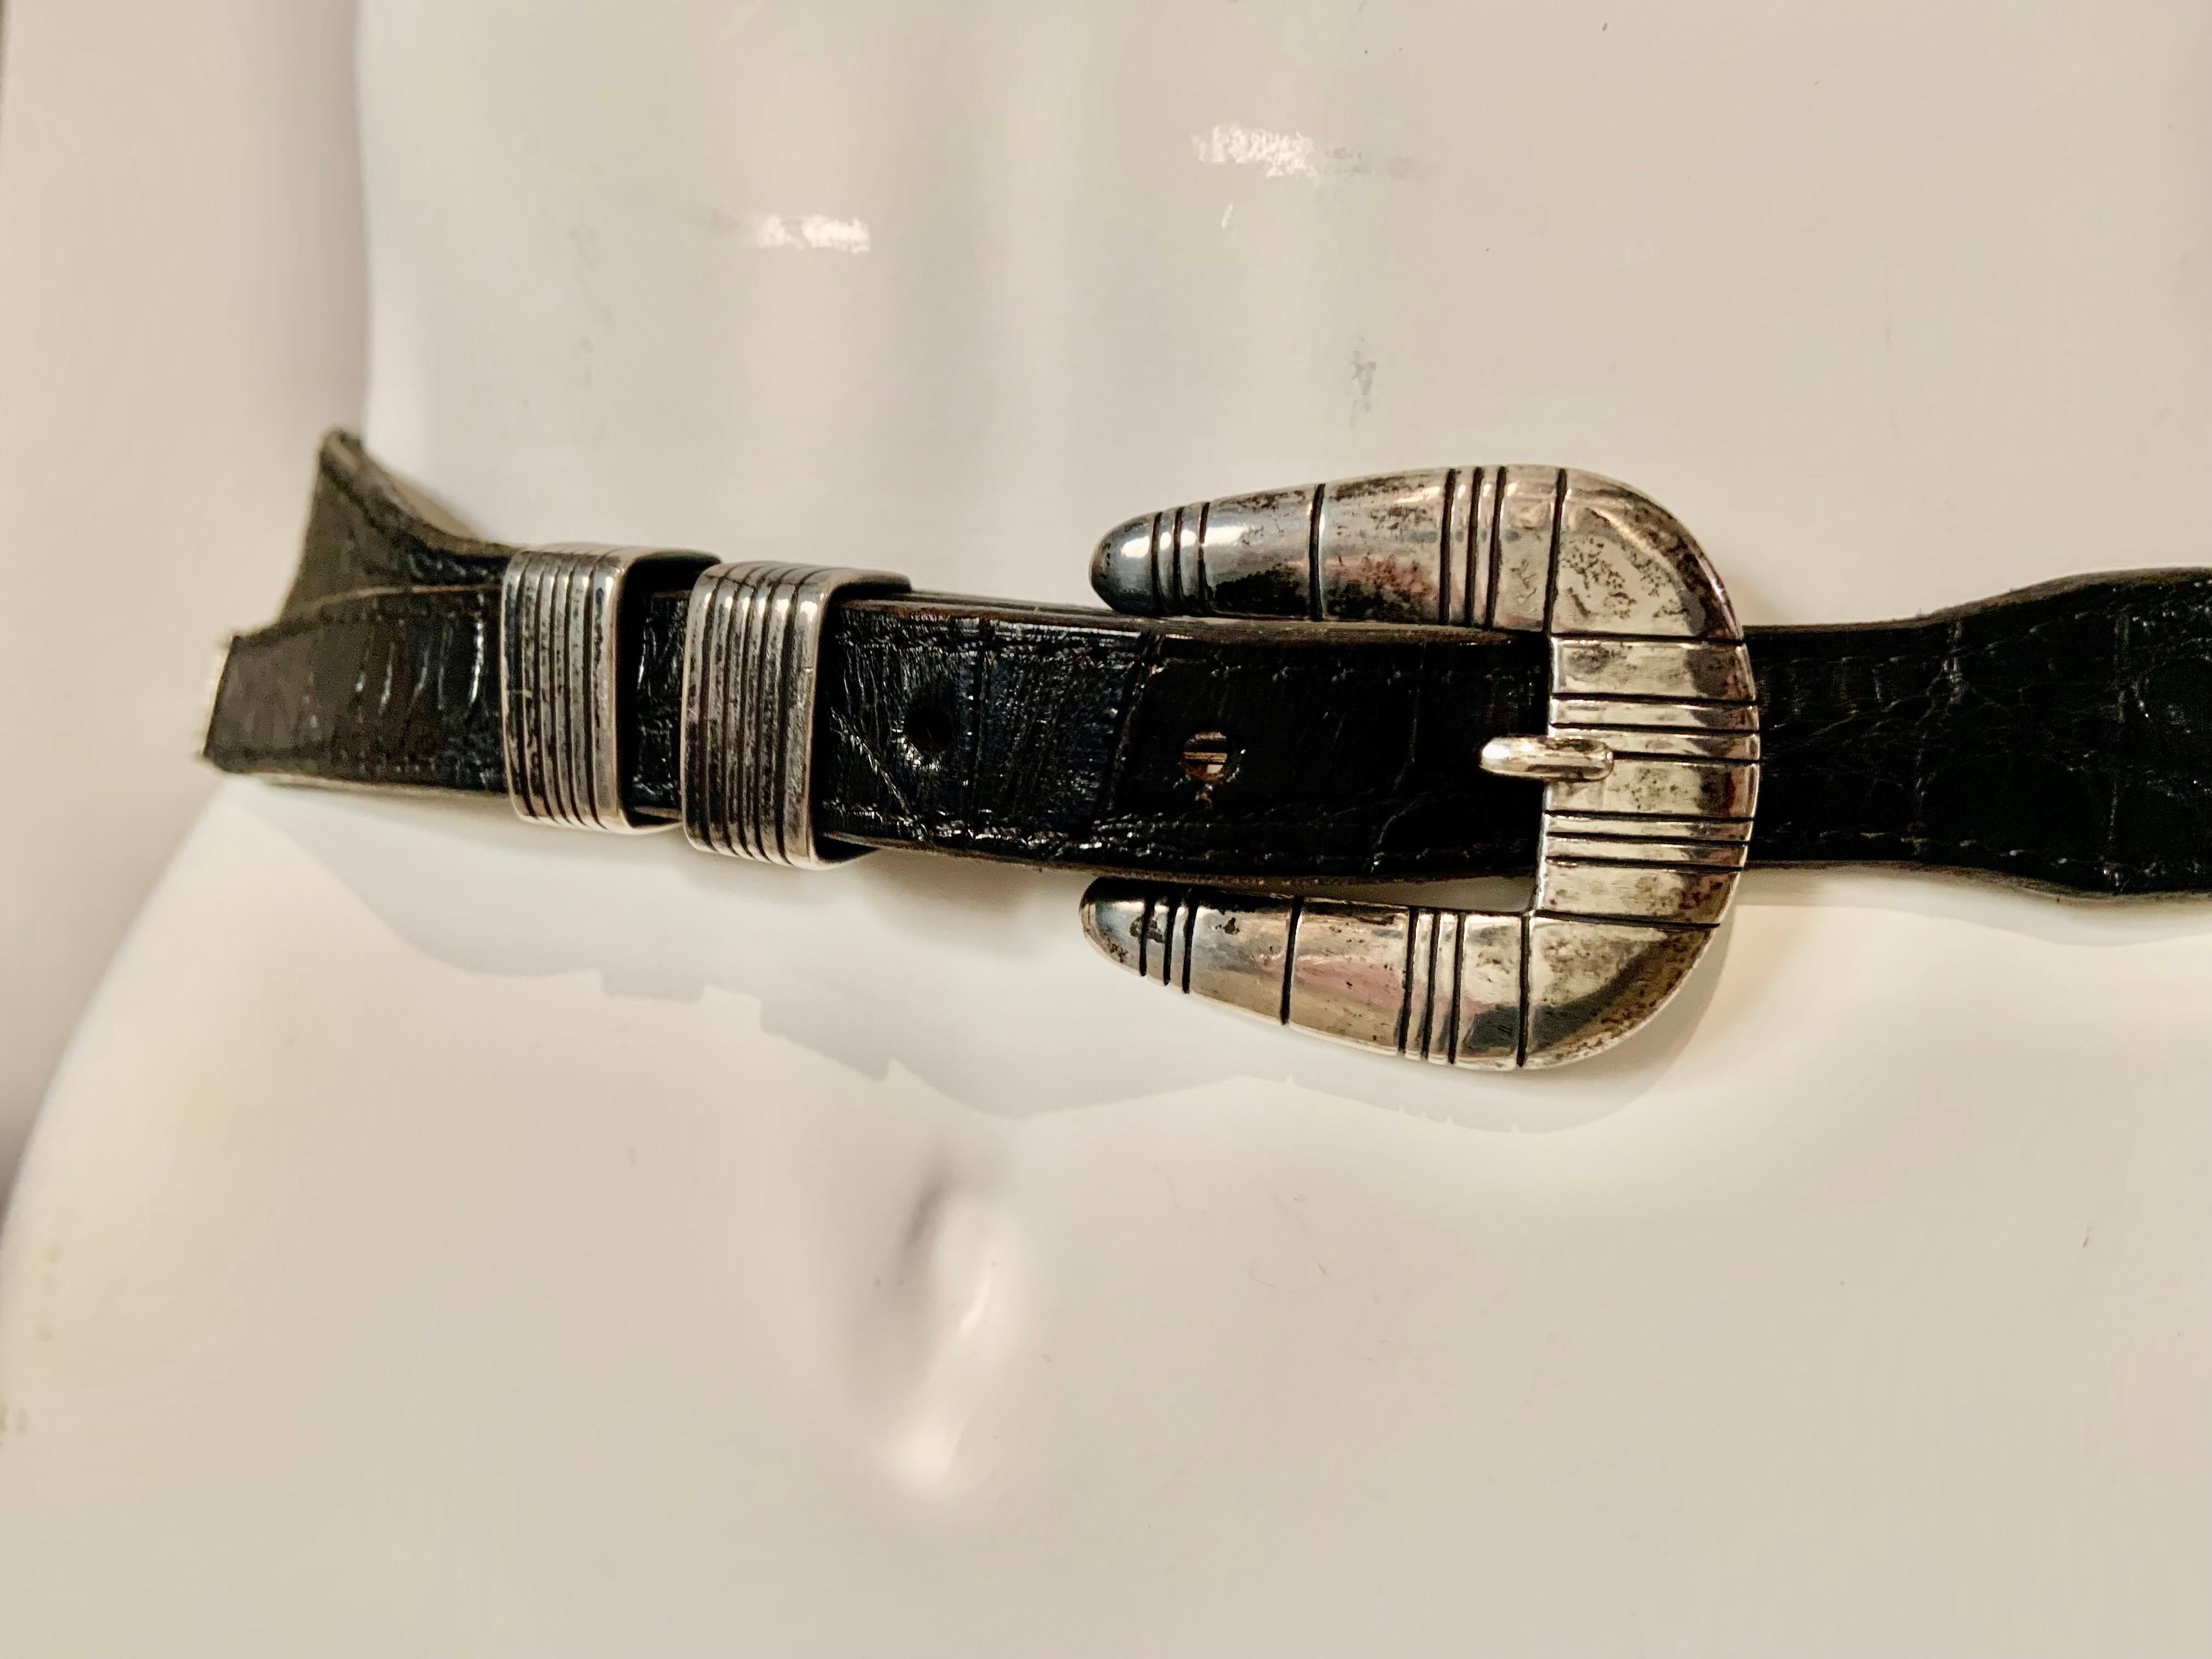 This hand made sterling silver buckle, keeper and tip set made and signed by George Begay has a graphic linear design on all three pieces.  The buckle is stamped Sterling and GB and it is combined with a black leather and stamped crocodile belt. 